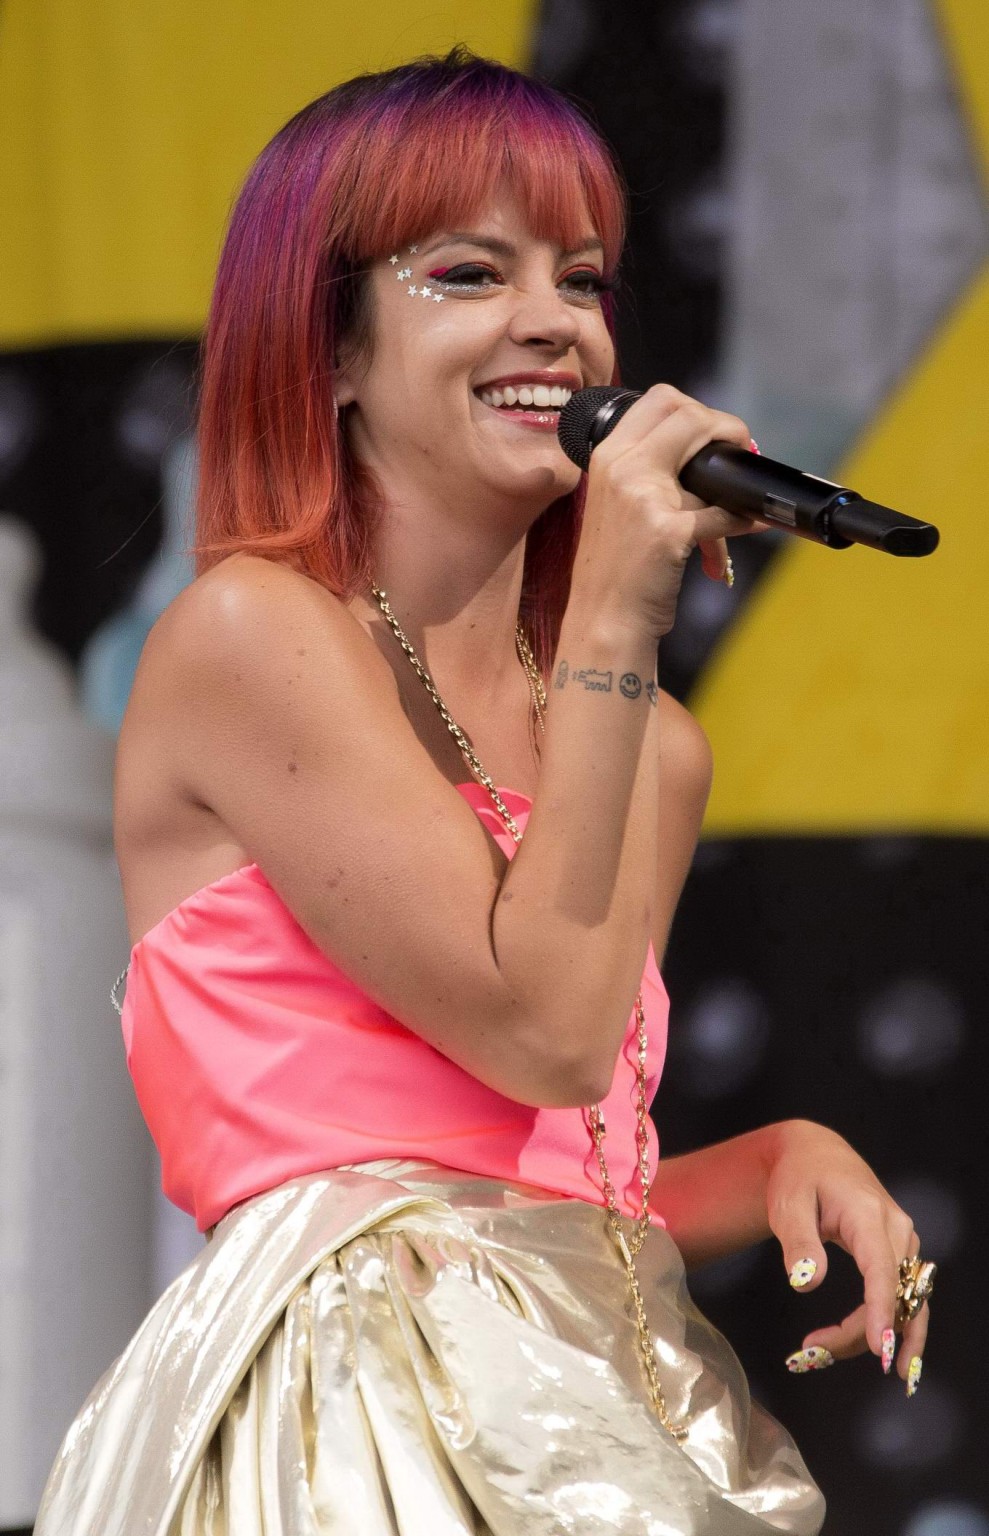 Lily Allen flashing her pink panties on stage at the Glastonbury Festival #75192503